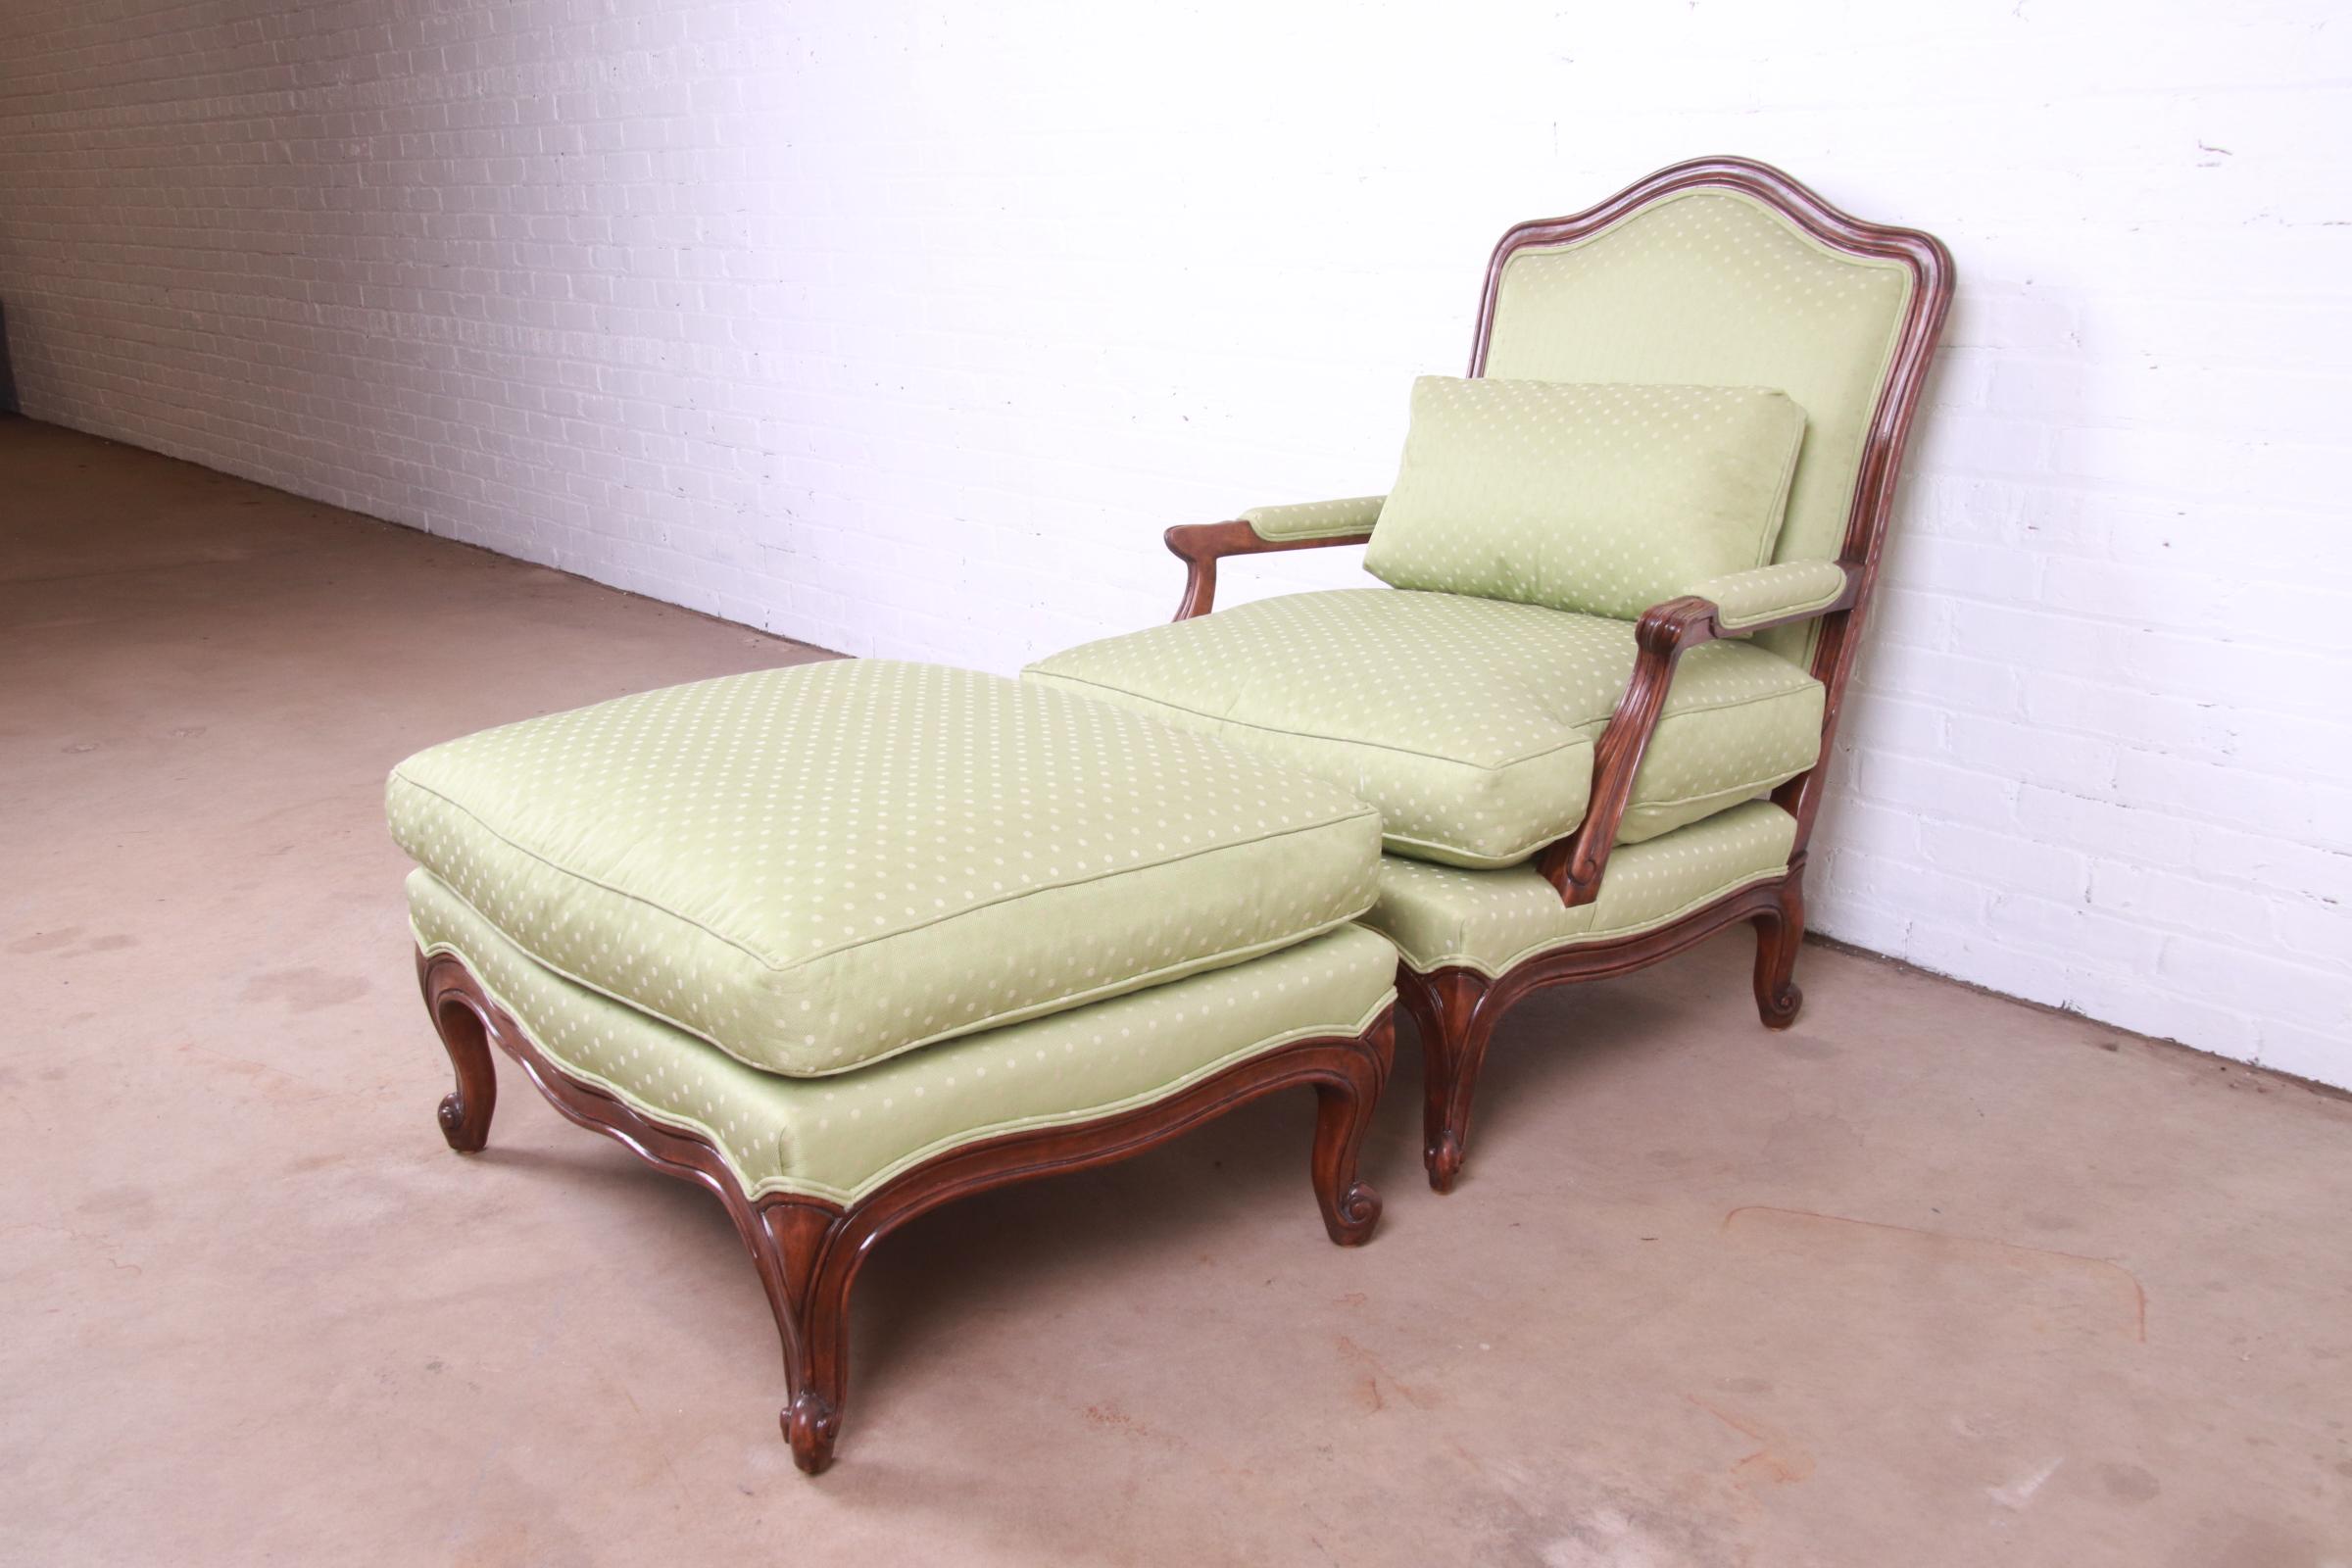 Minton-Spidell French Provincial Carved Walnut Upholstered Fauteuil with Ottoman In Good Condition For Sale In South Bend, IN